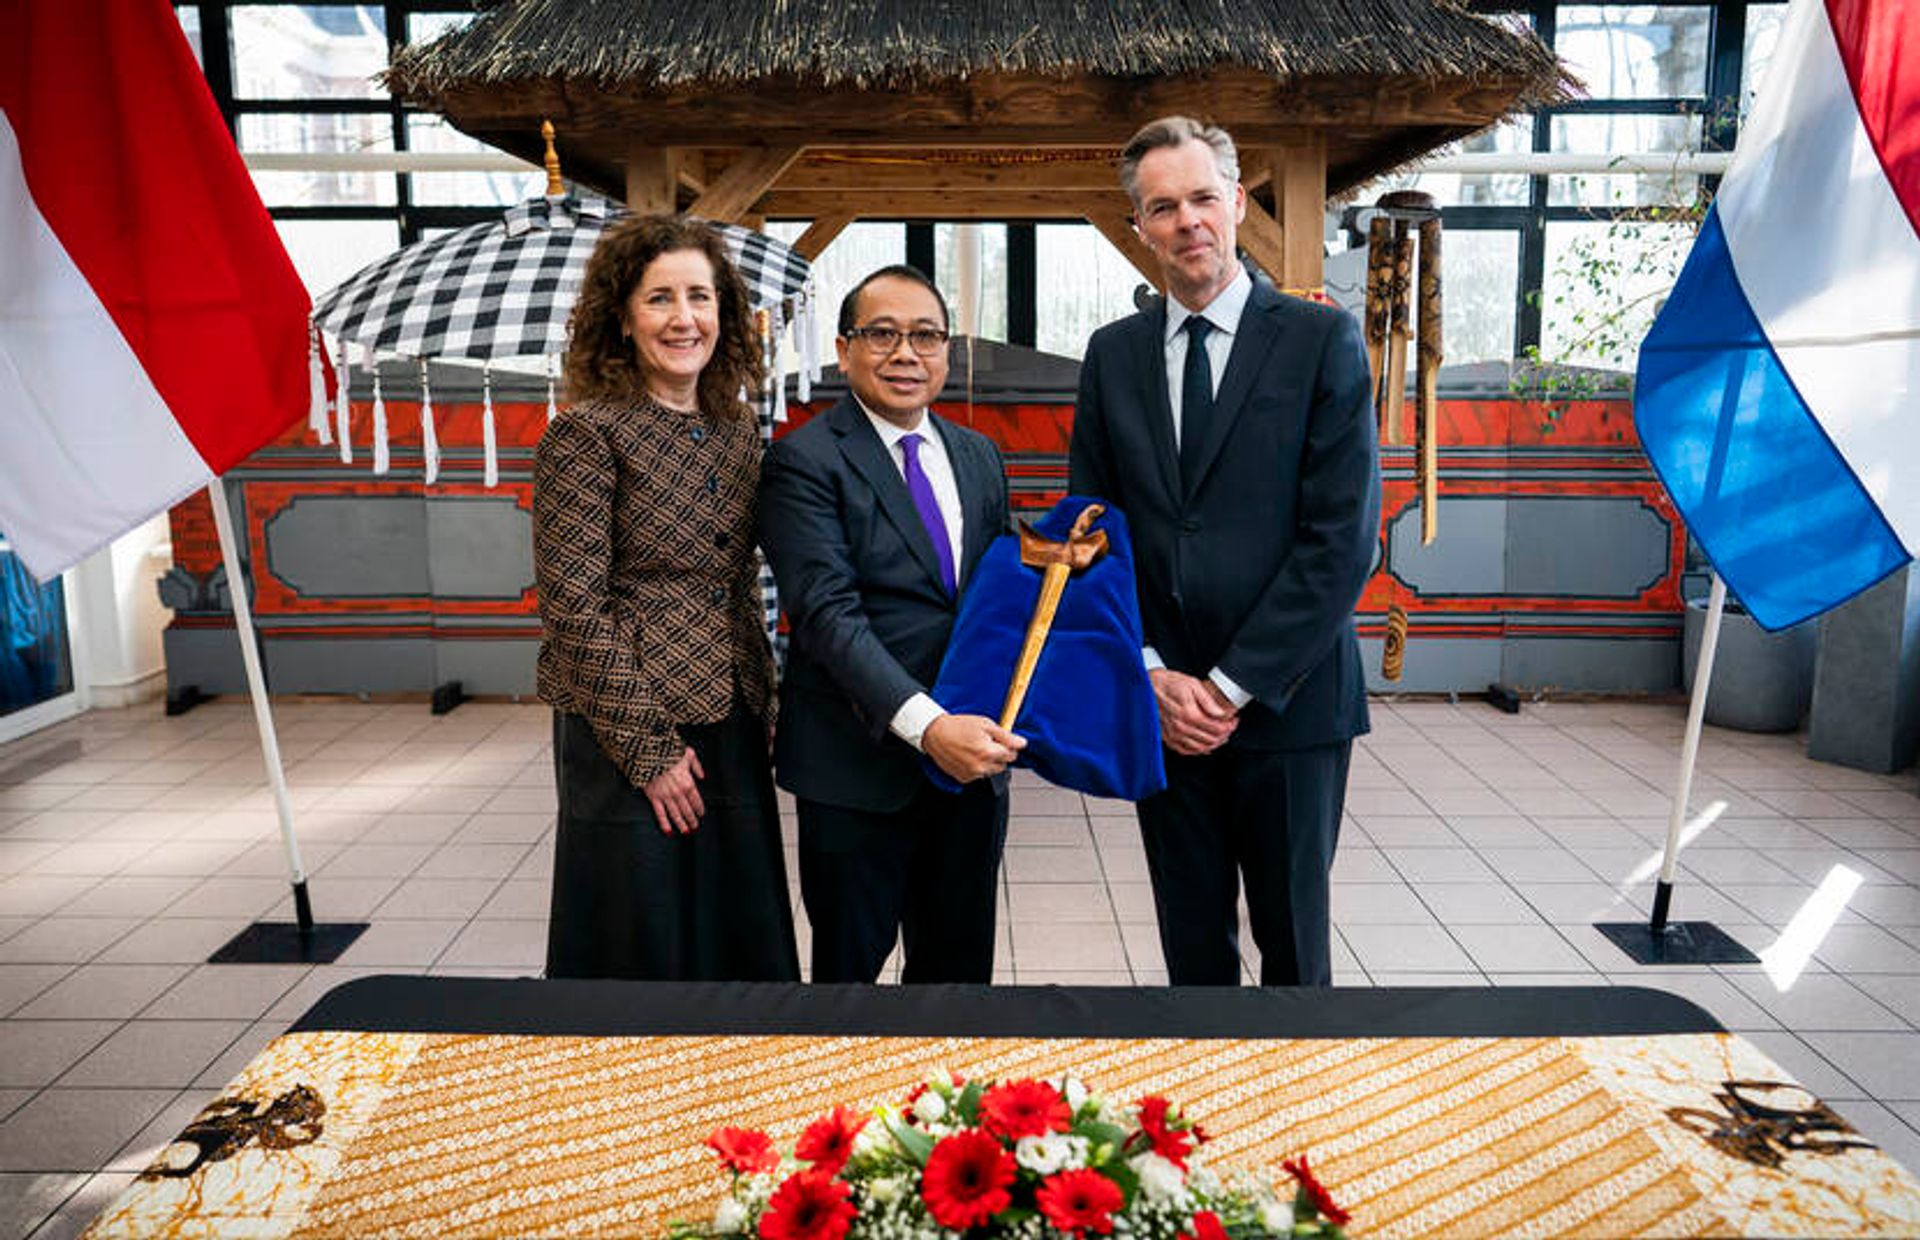 The Netherlands returned Prince Diponegoro's dagger to Indonesia last year in a ceremony attended by Ingrid van Engelshoven, the Dutch culture minister, I Gusti Agung Wesaka Puja, Indonesia’s ambassador to the Netherlands, and Stijn Schoonderwoerd, director of the Museum of Ethnology © OCW / Freek van den Bergh